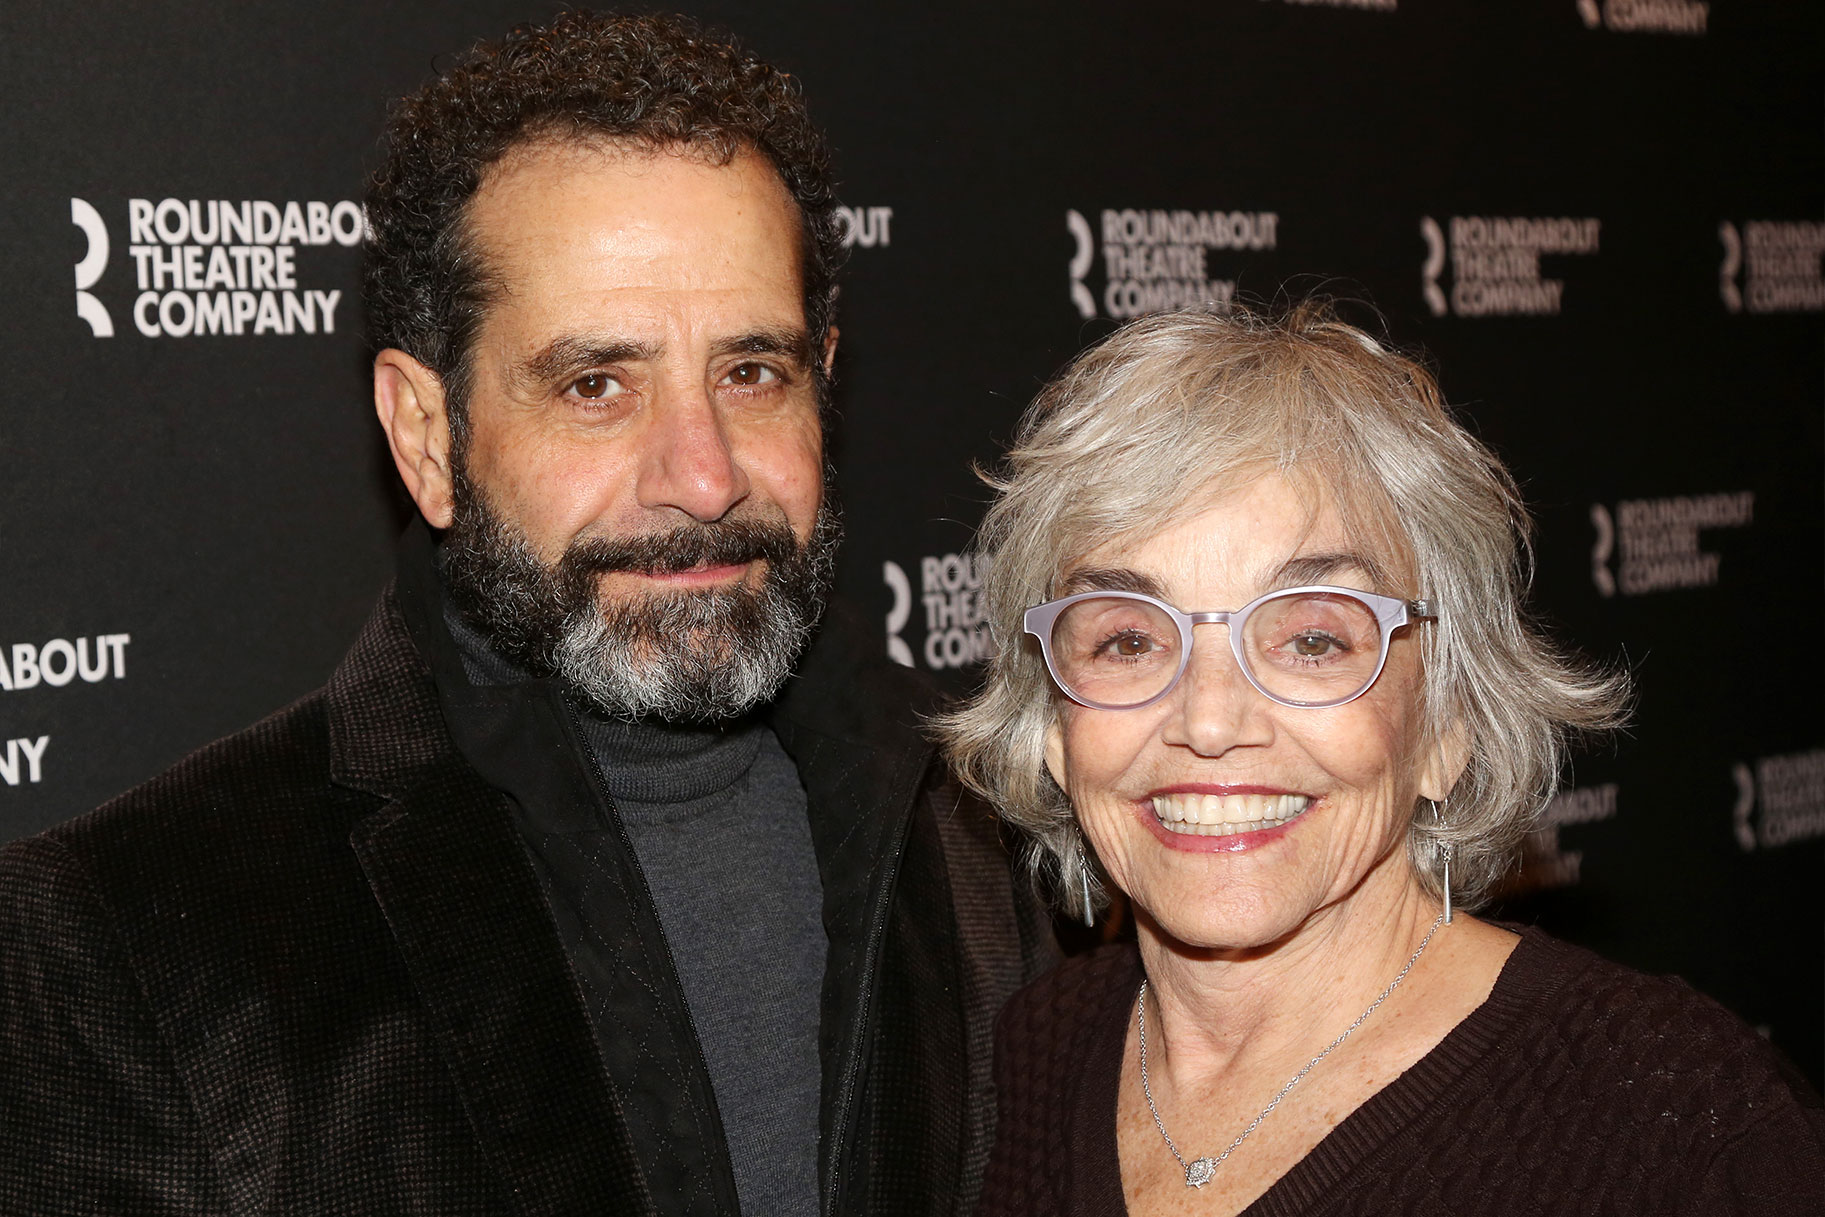 Tony Shalhoub and wife Brooke Adams pose at the opening night of "A Soldier's Play" on Broadwa